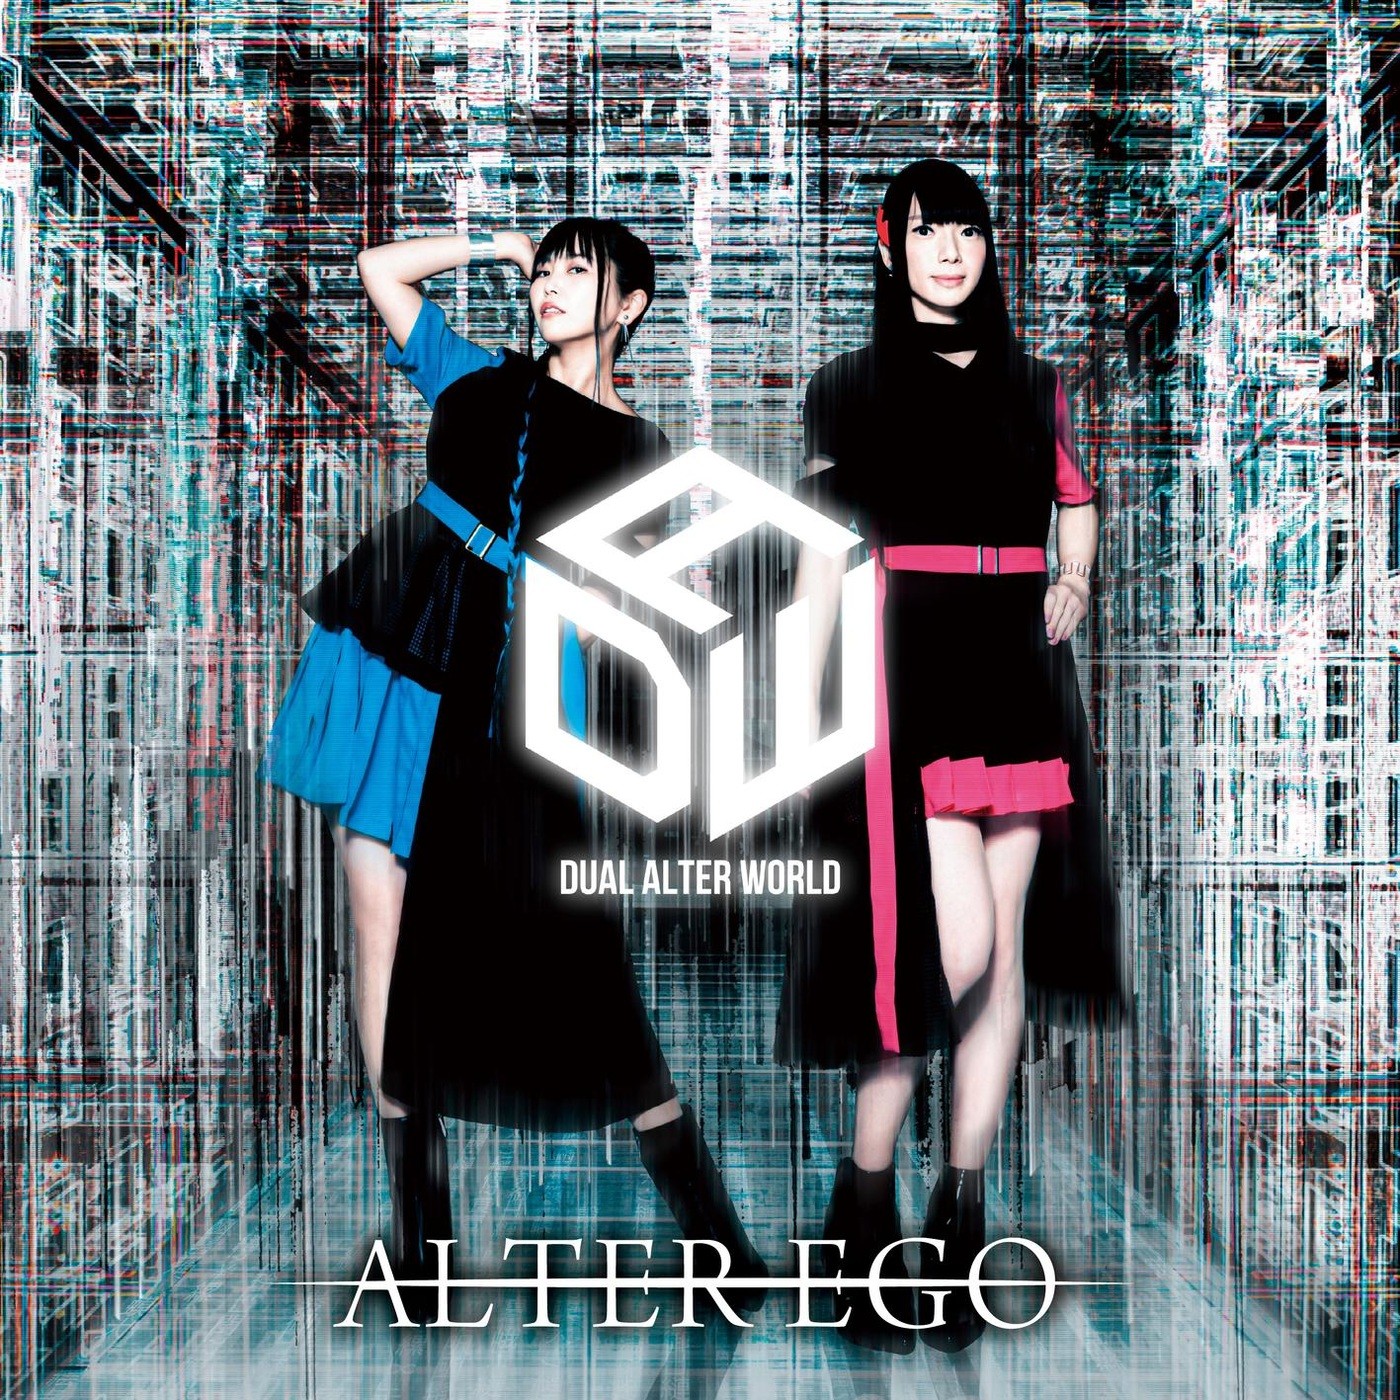 Dual Alter World – ALTER EGO [FLAC / 24bit Lossless / WEB] [2019.09.18]